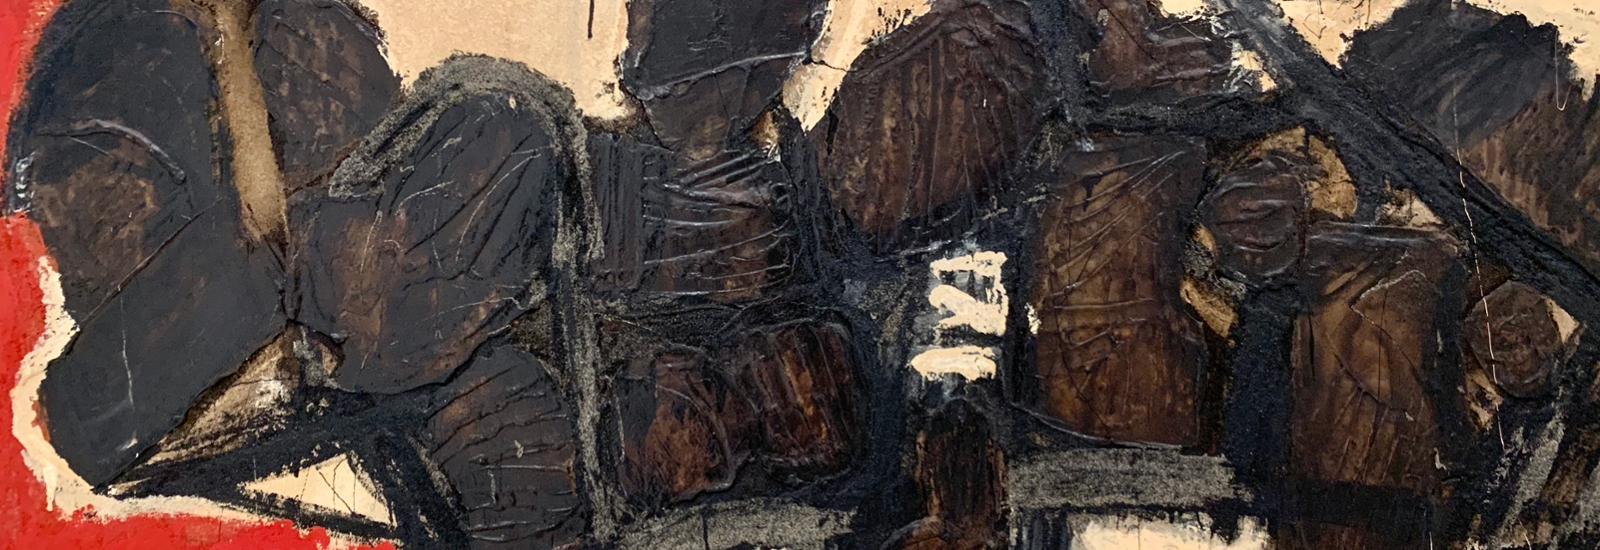 abstract painting in thick colors of black, brown, tan and red, impasto technique employed